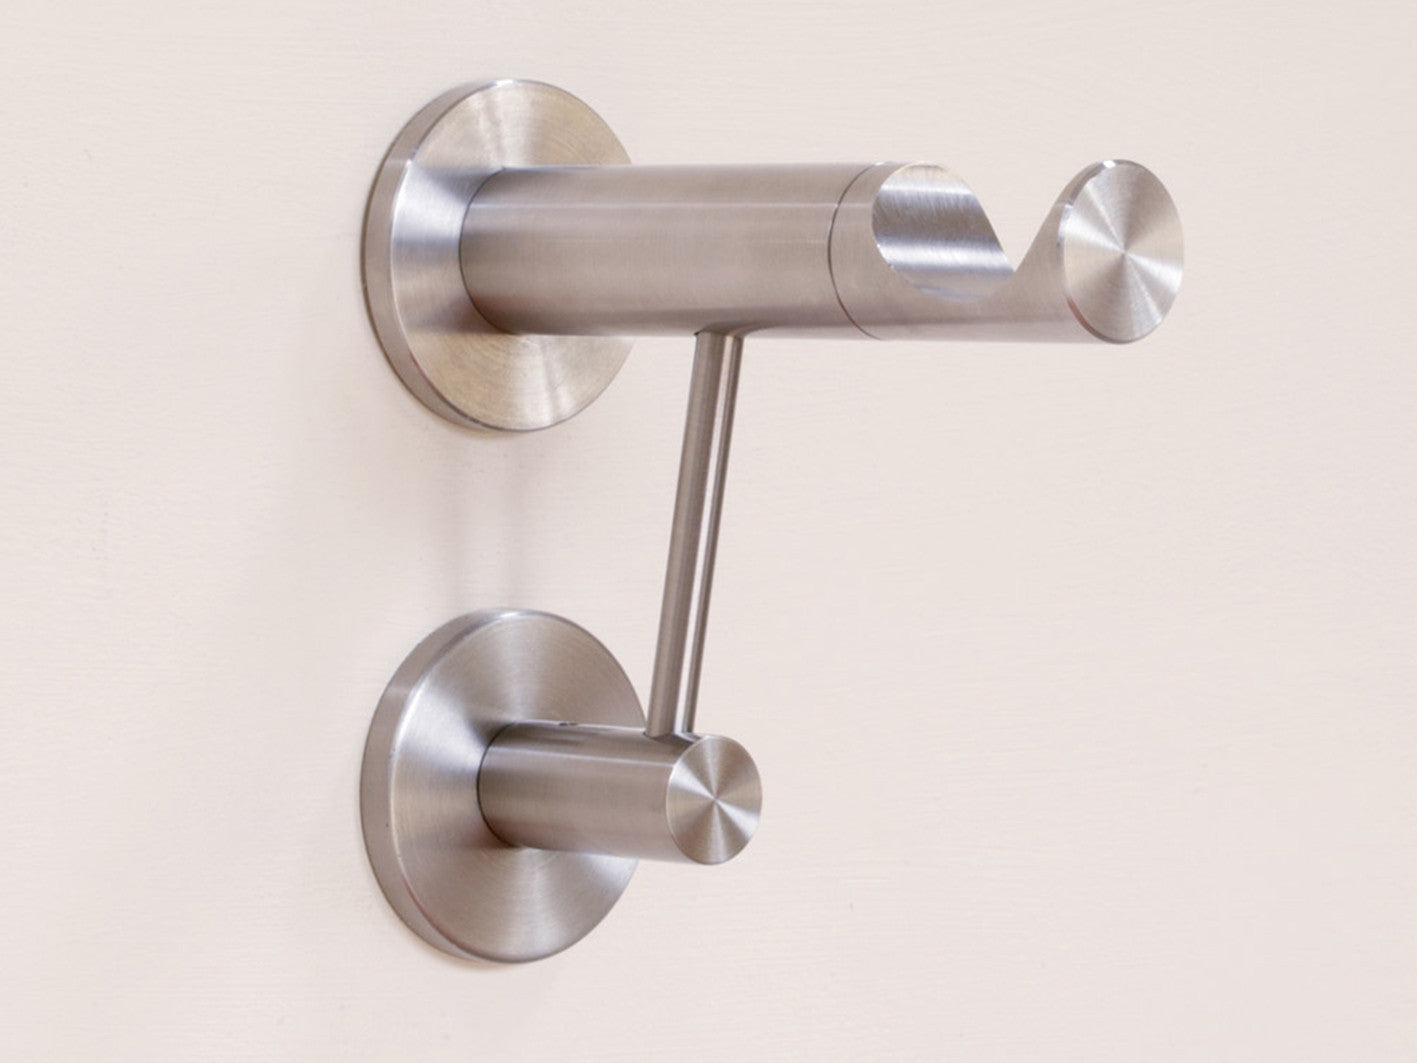 Stainless Steel extra support arm & curtain pole bracket for heavy curtains